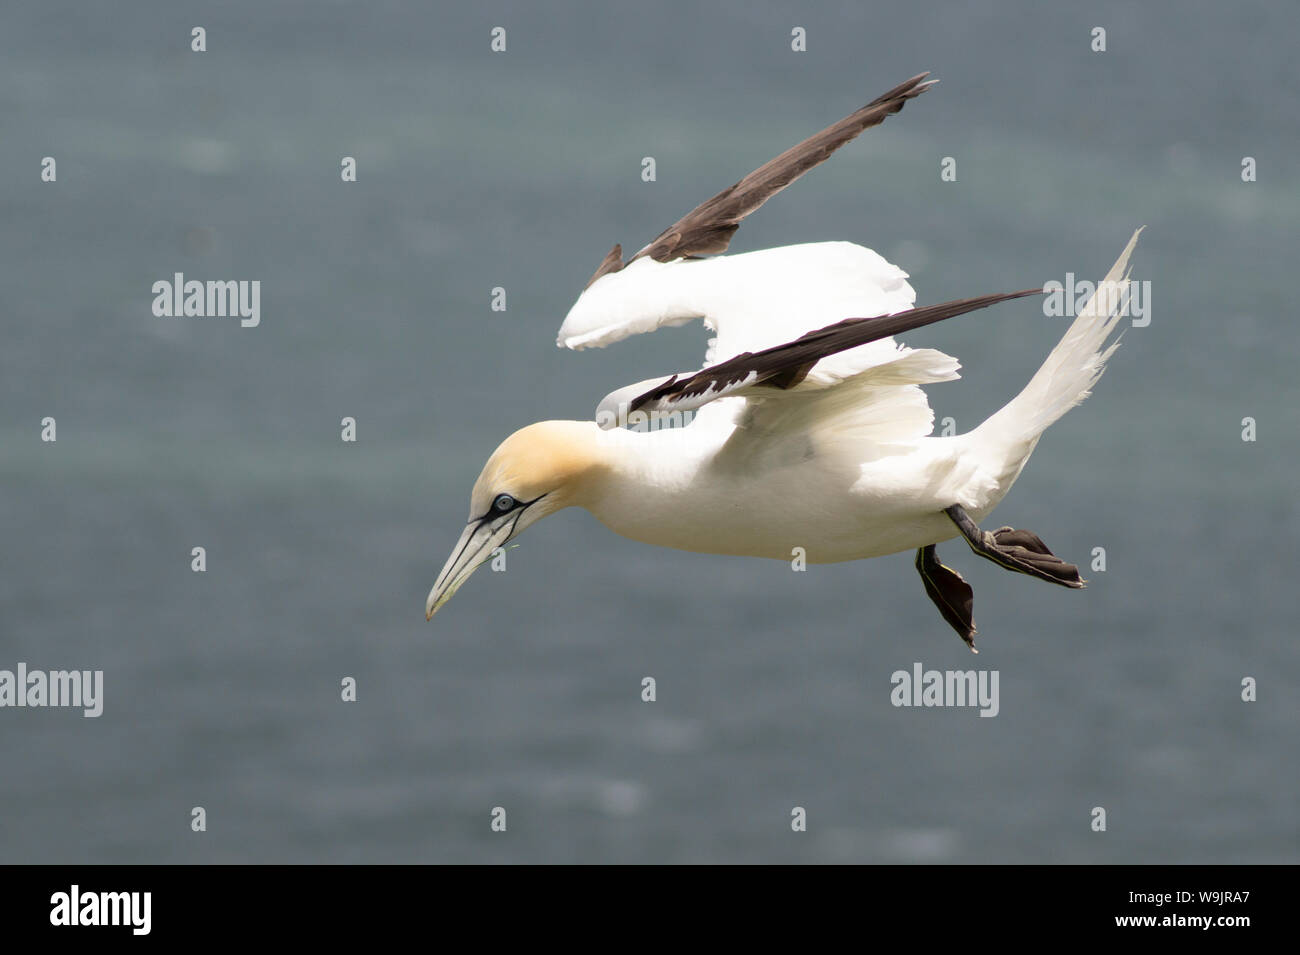 Gannet skilfully riding the winds on the edge of RSPB’s Bempton Cliffs Stock Photo